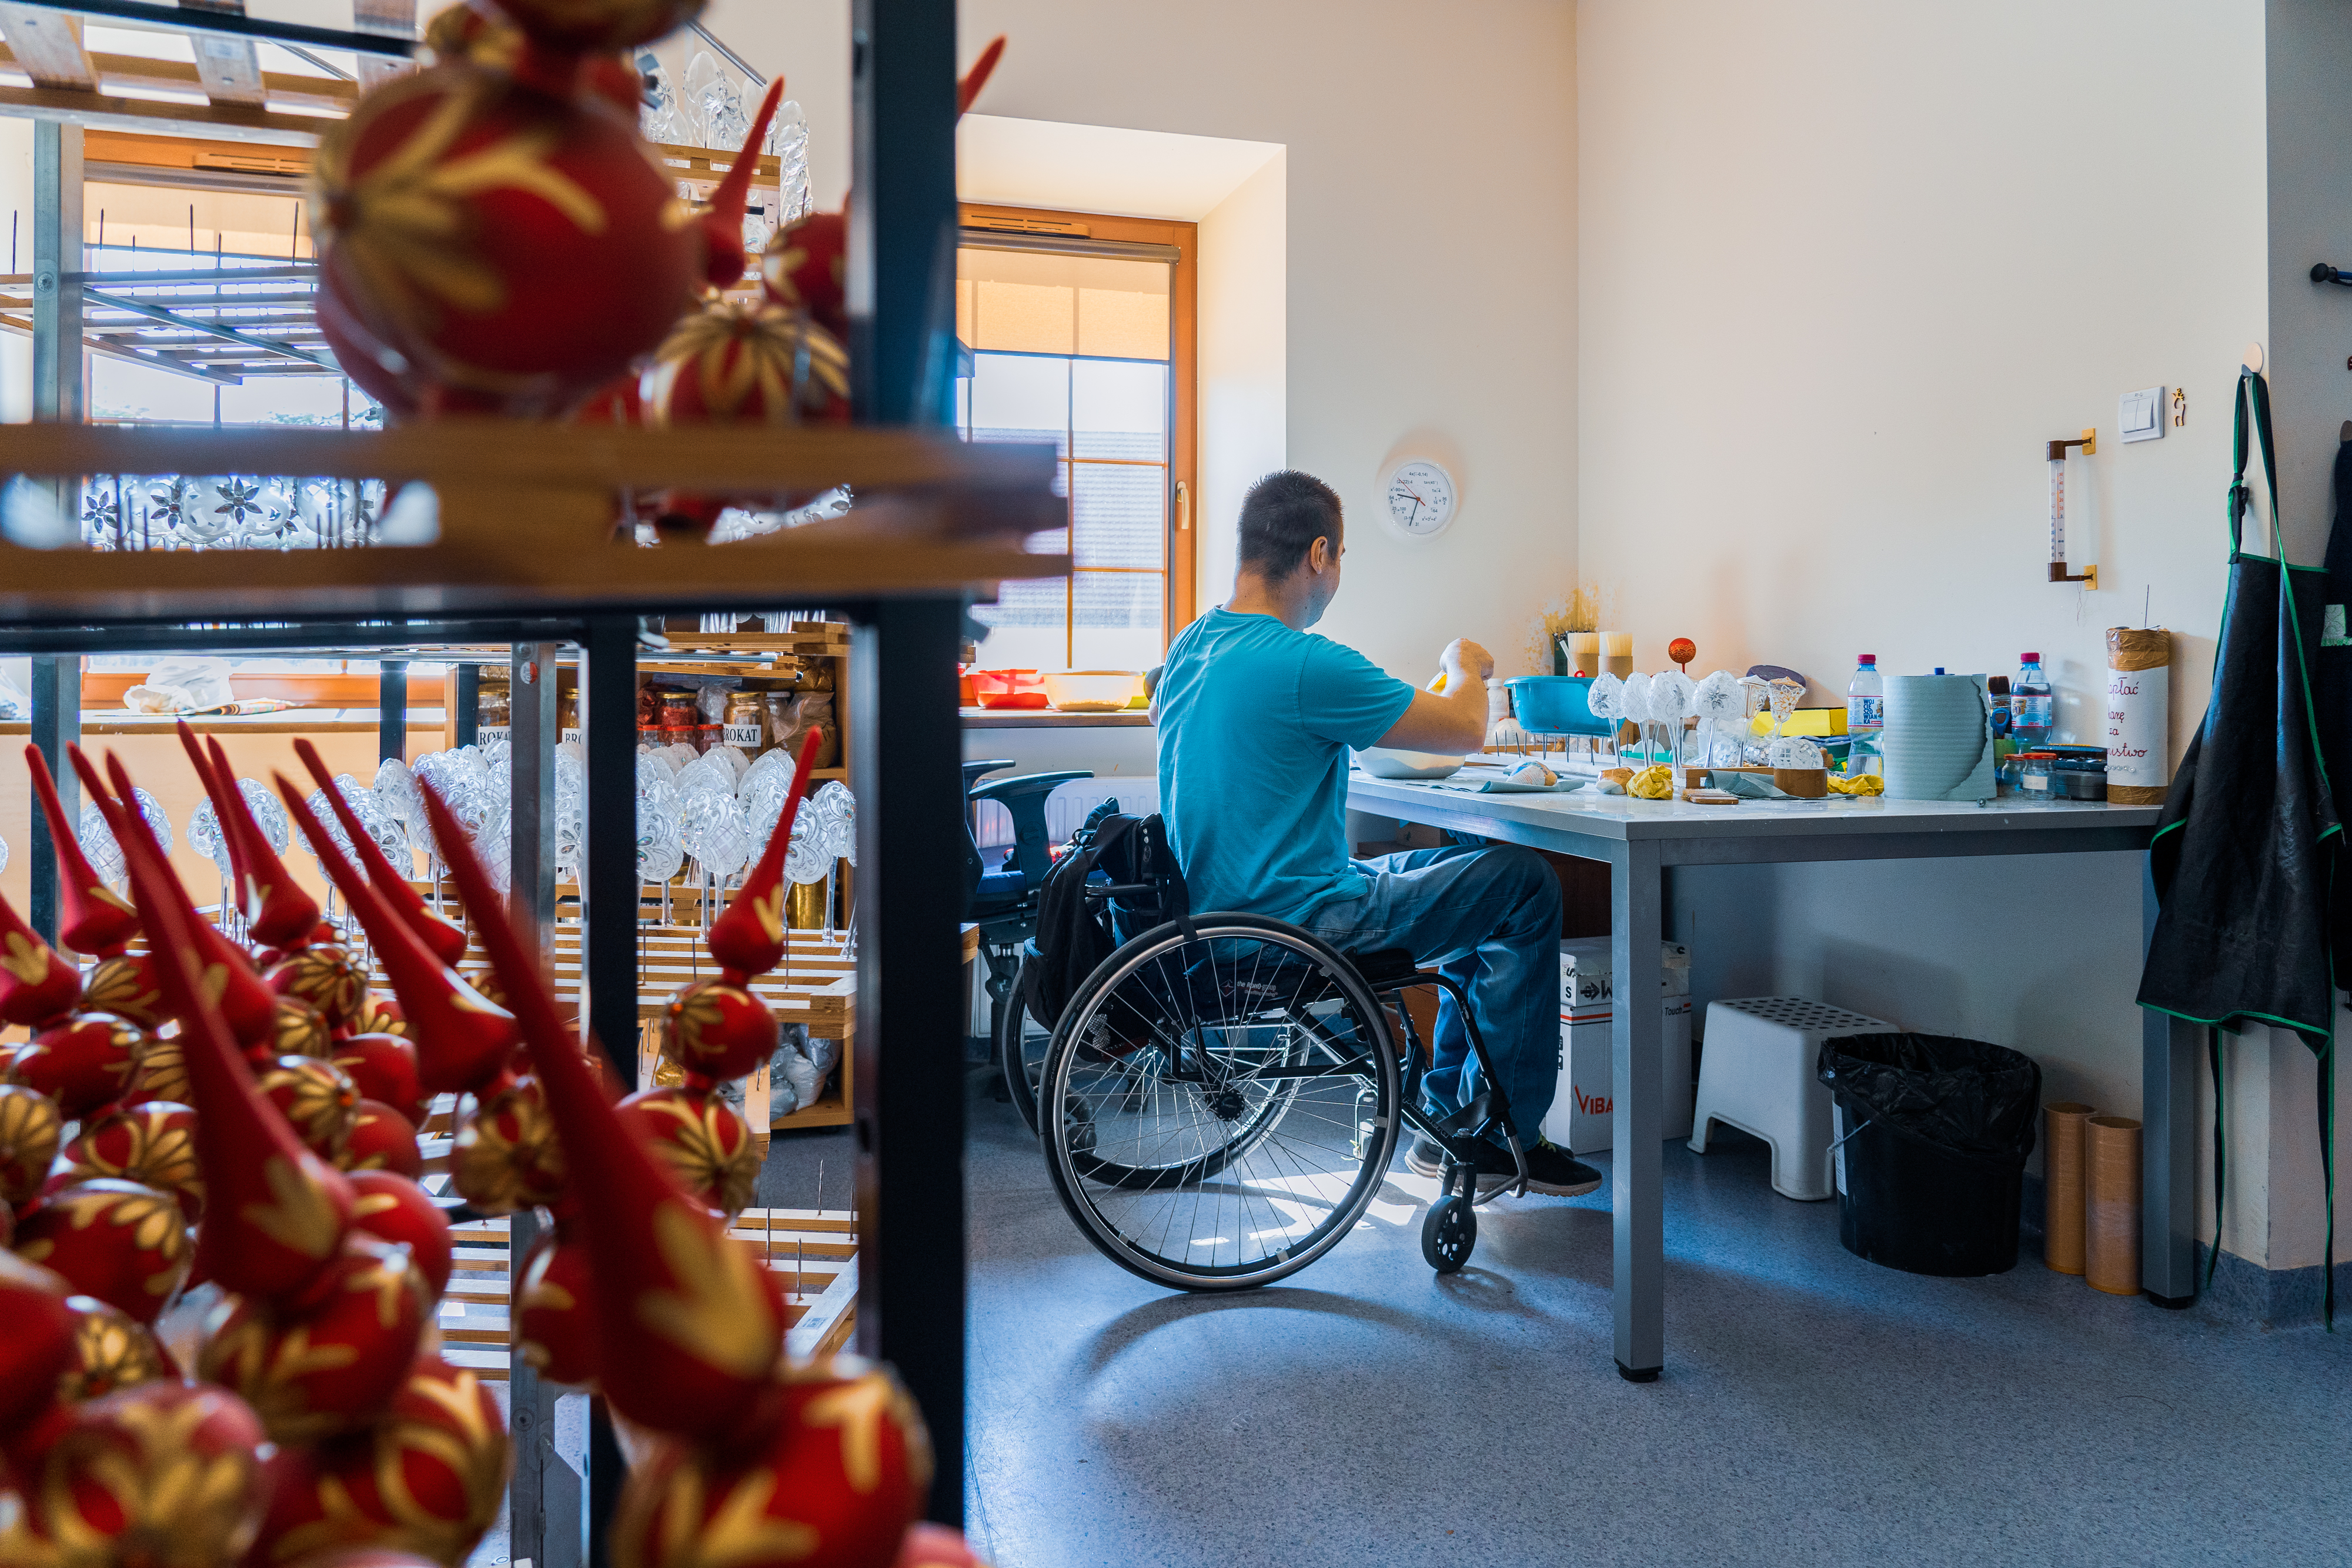 The picture shows a young, disabled man painting Christmas balls.